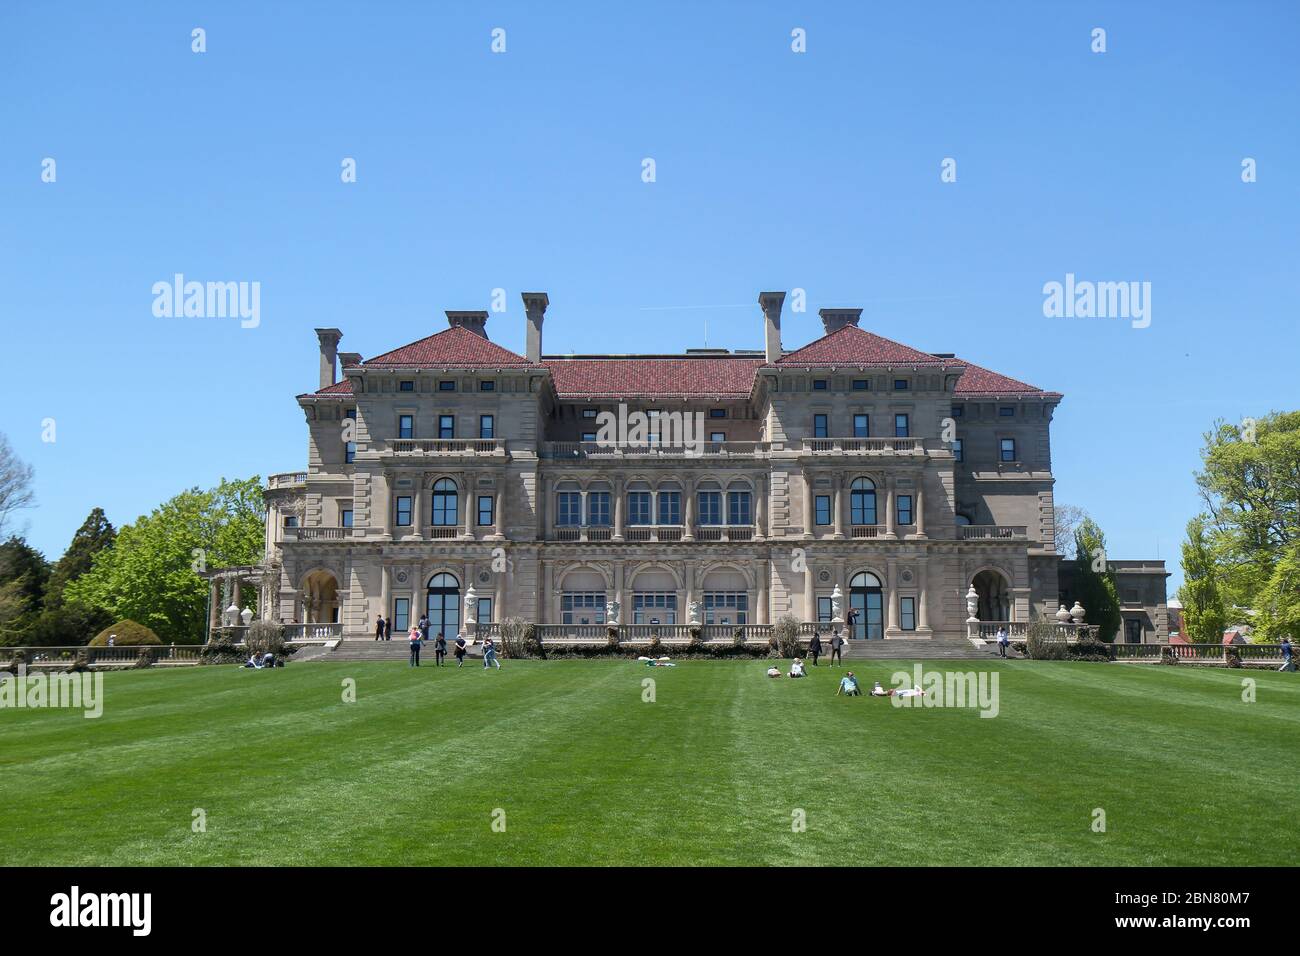 The Breakers Mansion, Newport, Rhode Island, United States Stock Photo